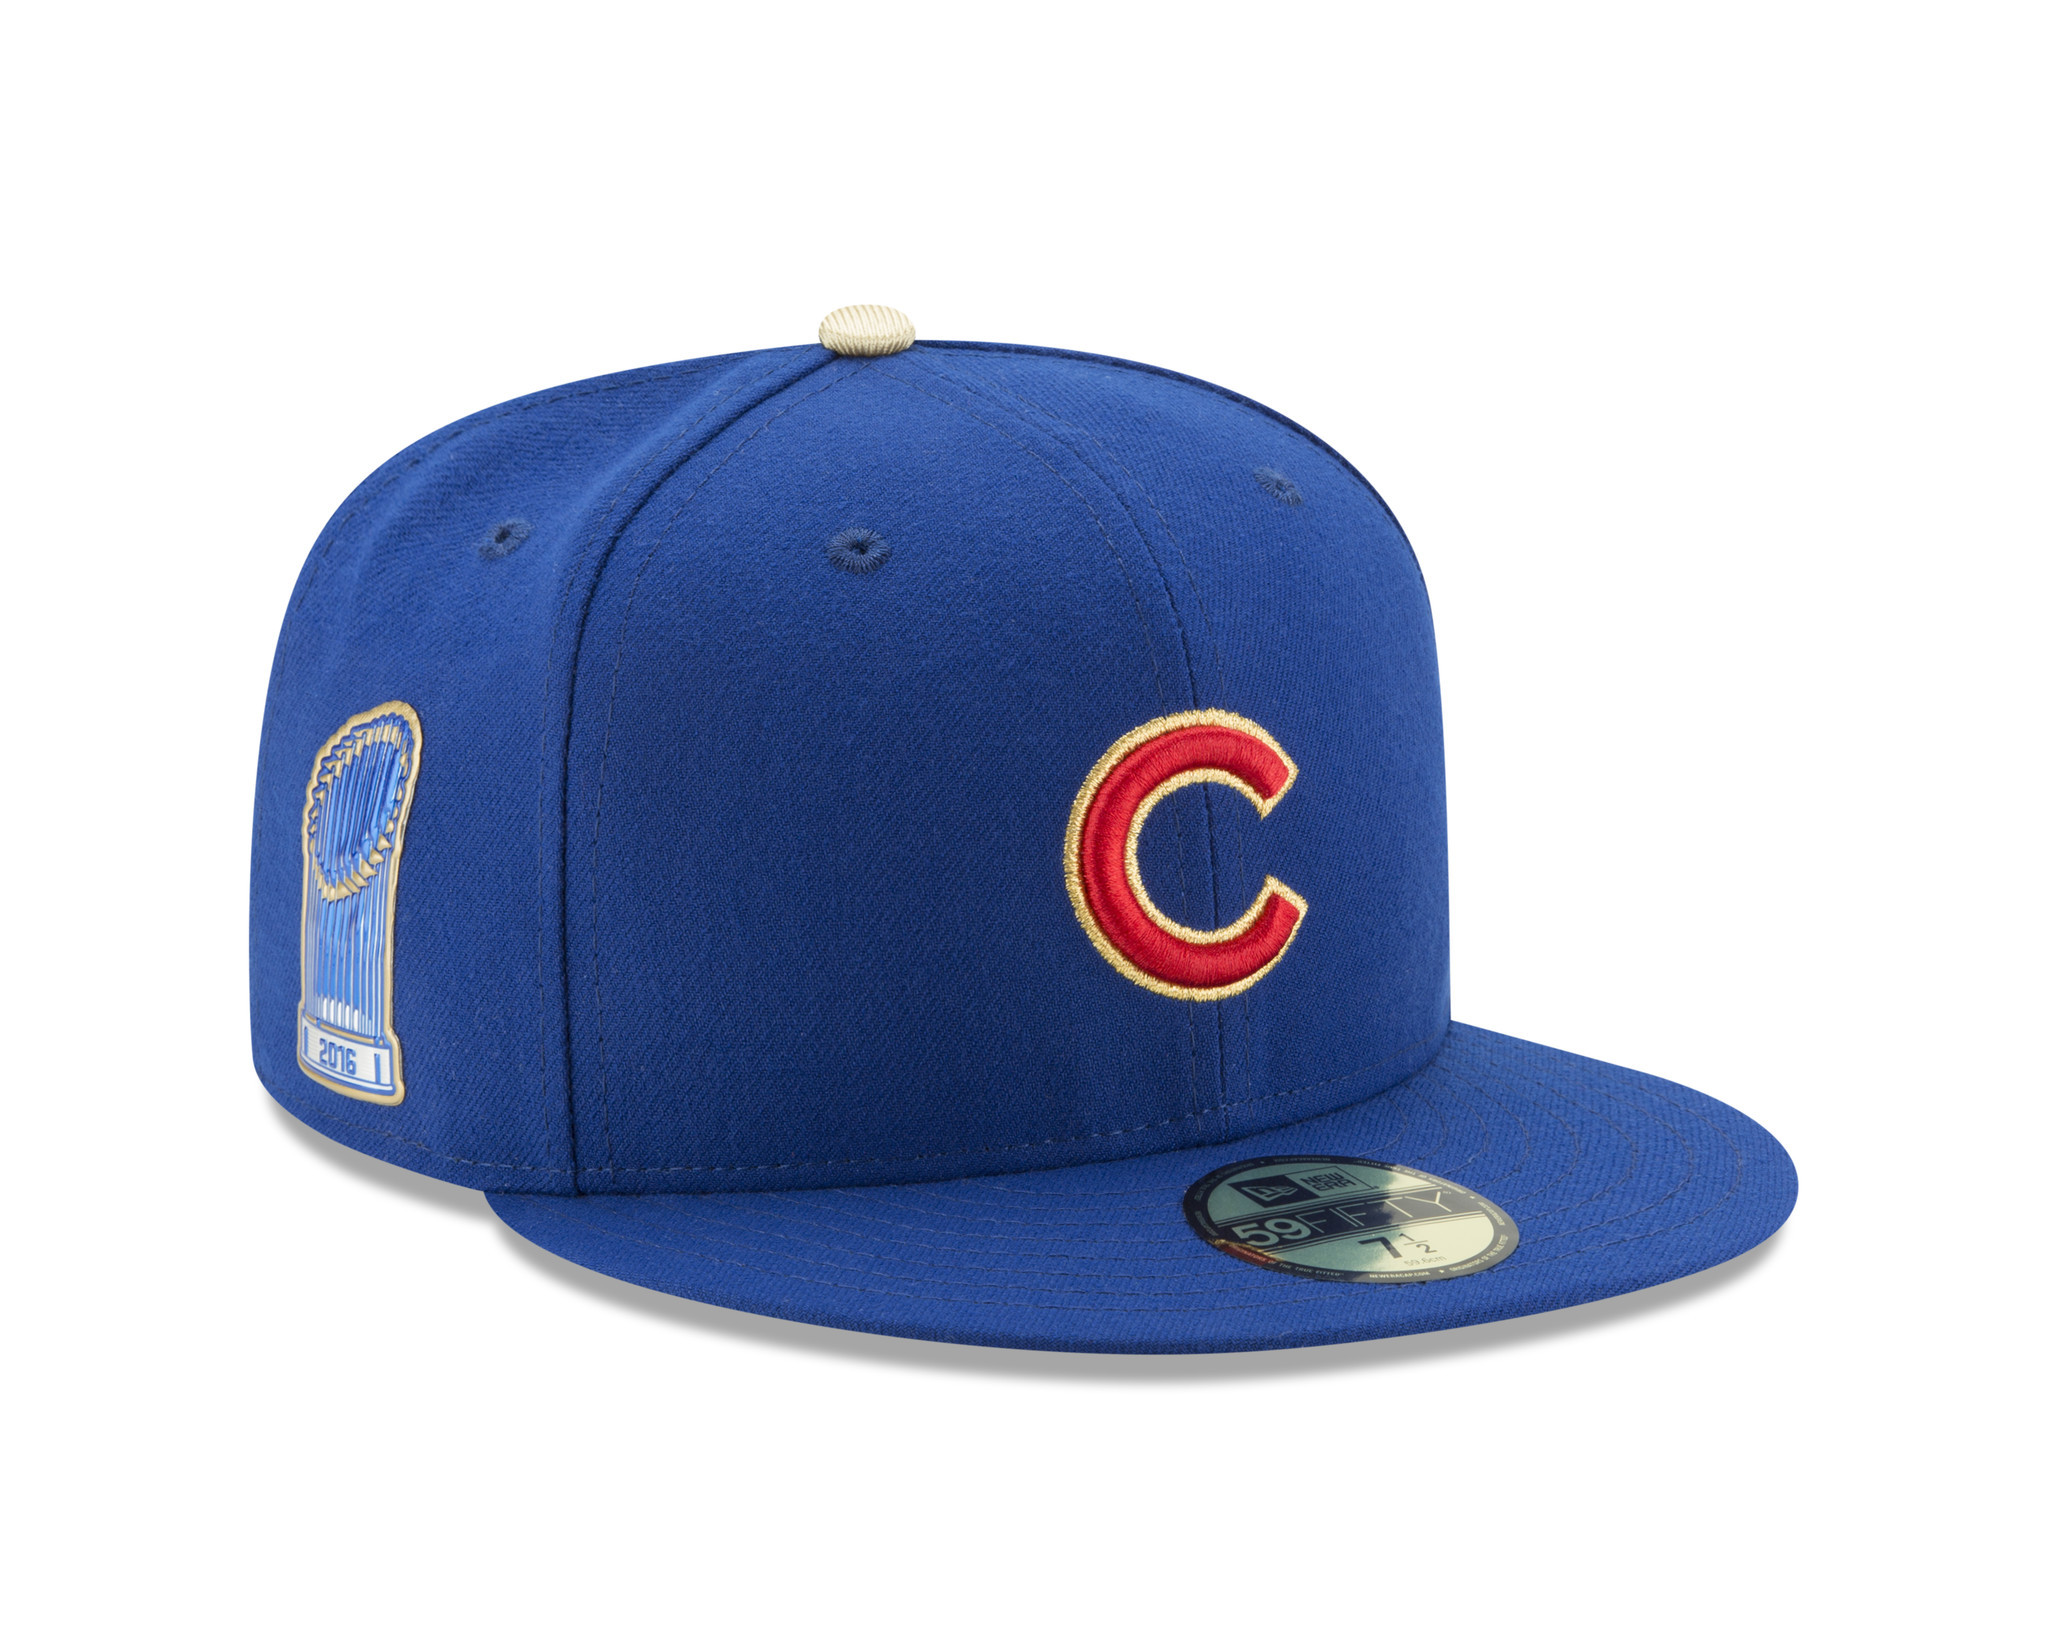 Cubs' uniforms get golden touch to commemorate 2016 World Series title - Chicago Tribune2048 x 1638